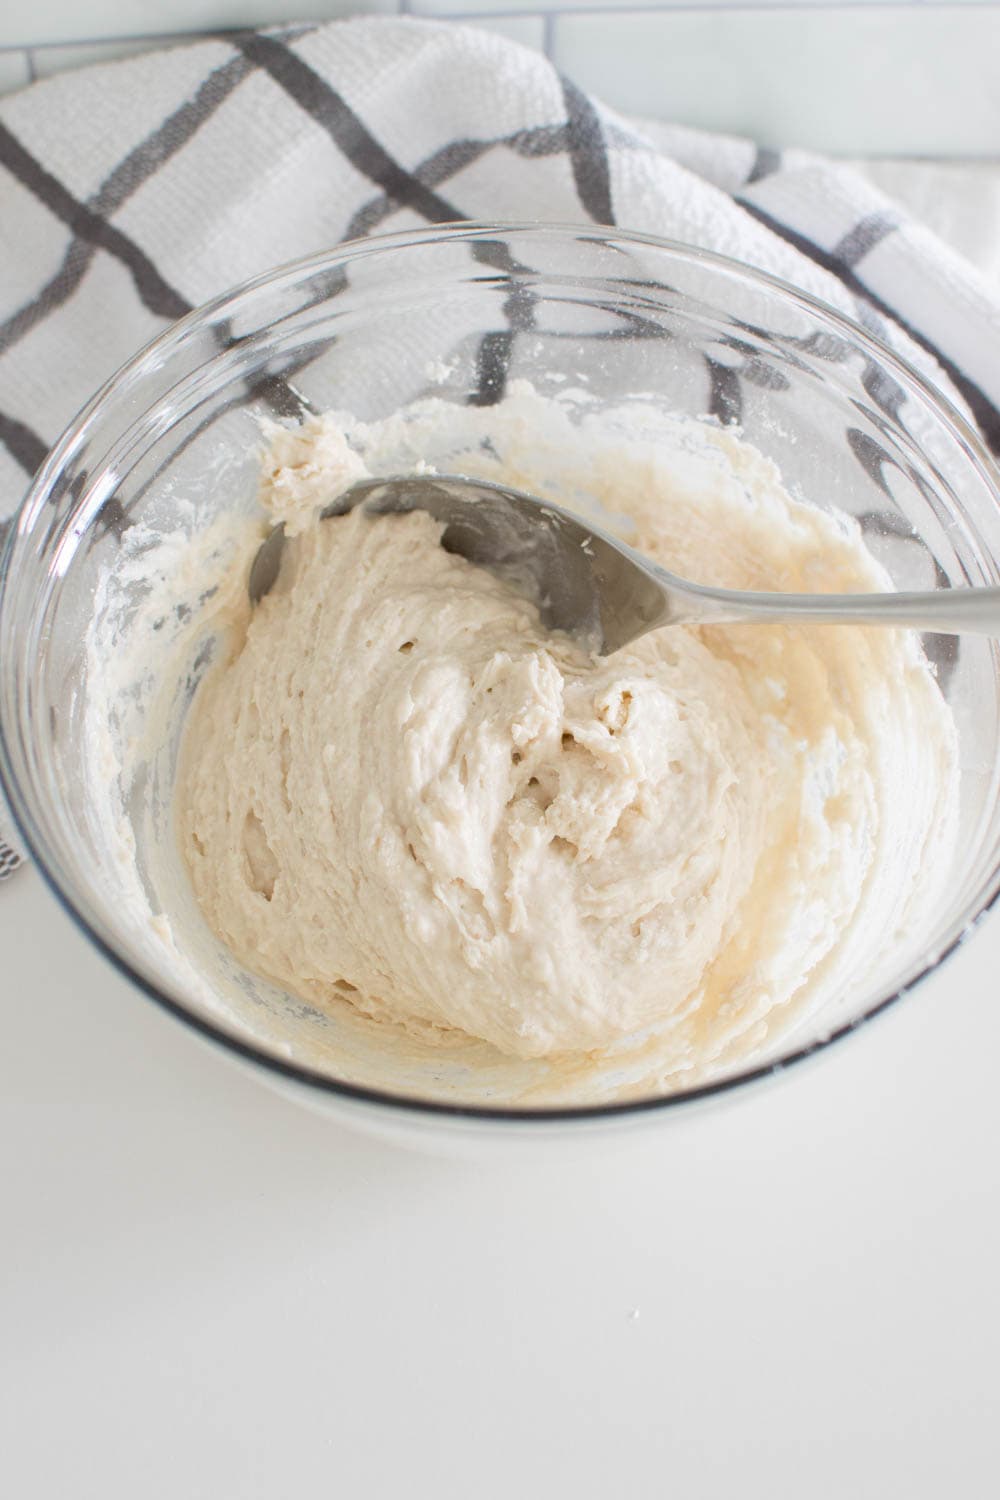 A spoon mixing Bisquick and milk together to form a thick batter